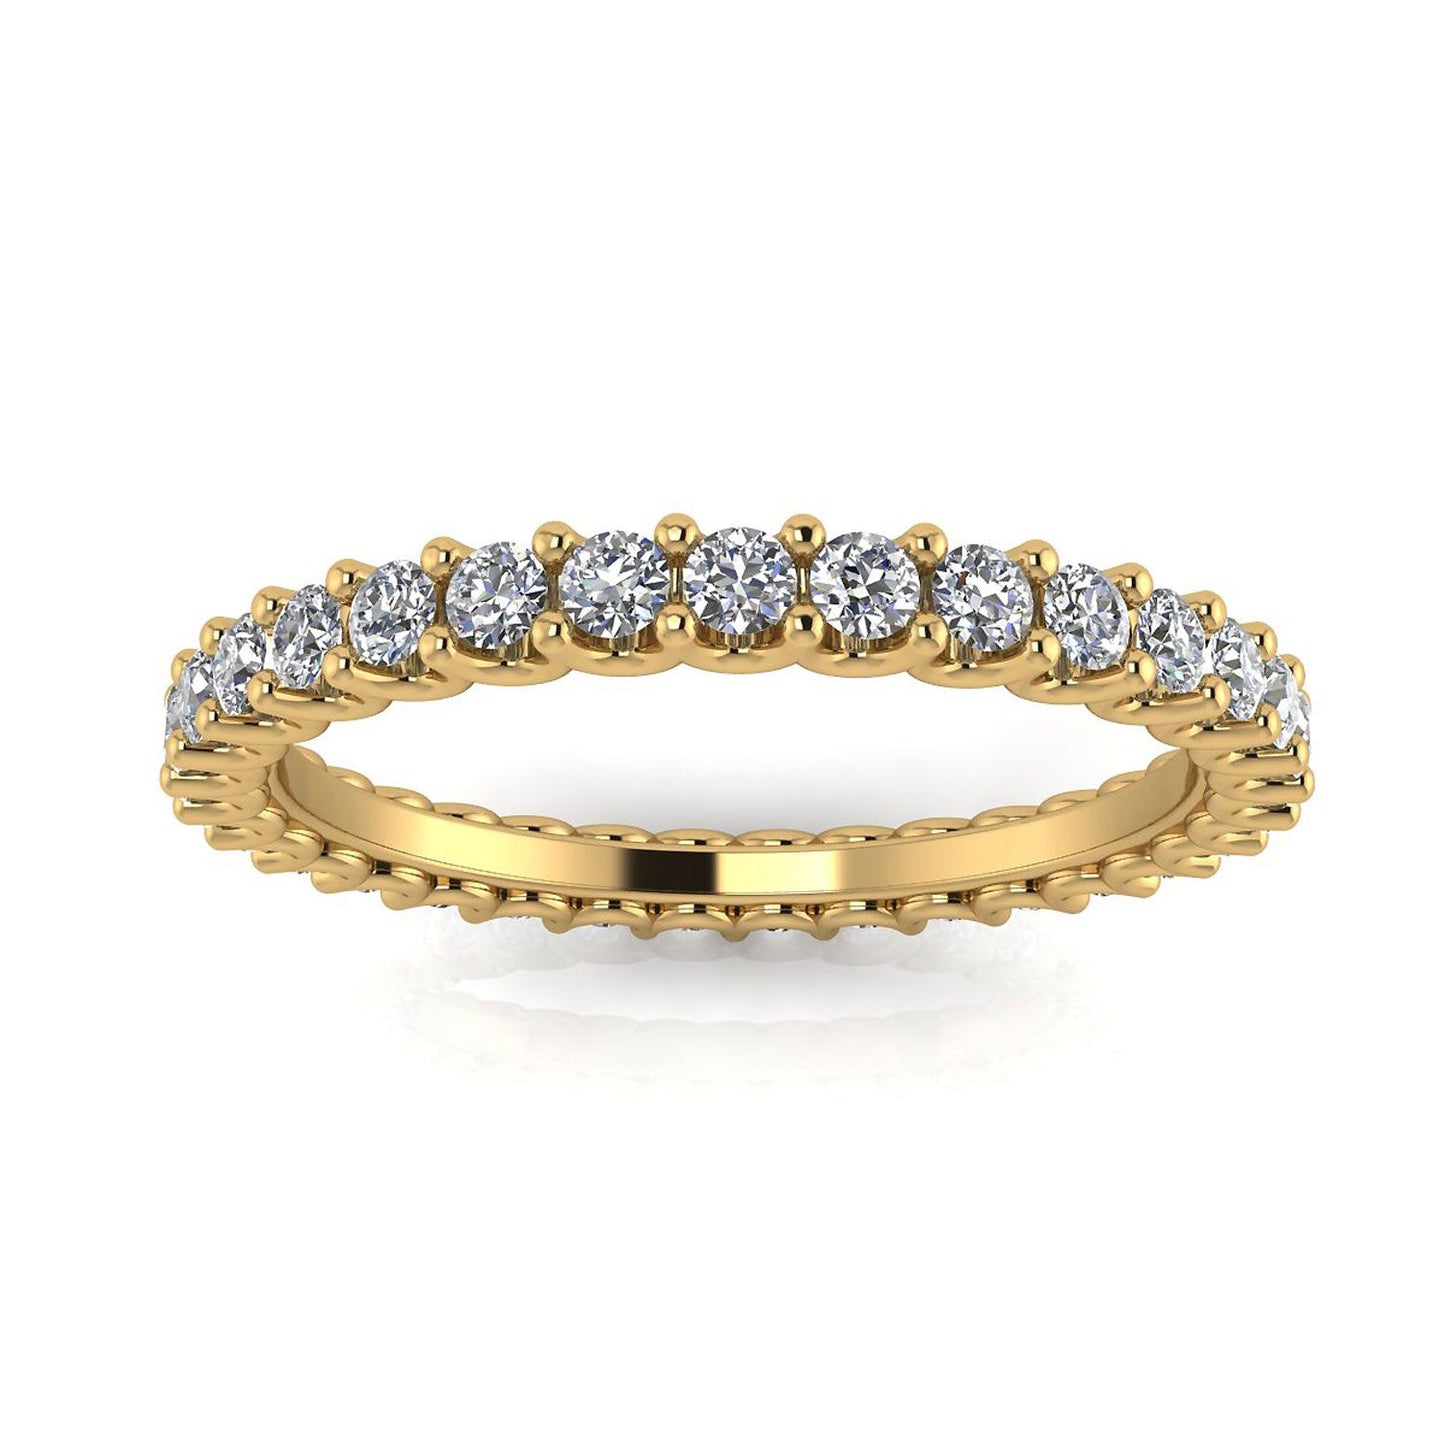 Round Brilliant Cut Diamond Shared Prong Set Eternity Ring In 18k Yellow Gold  (0.47ct. Tw.) Ring Size 6